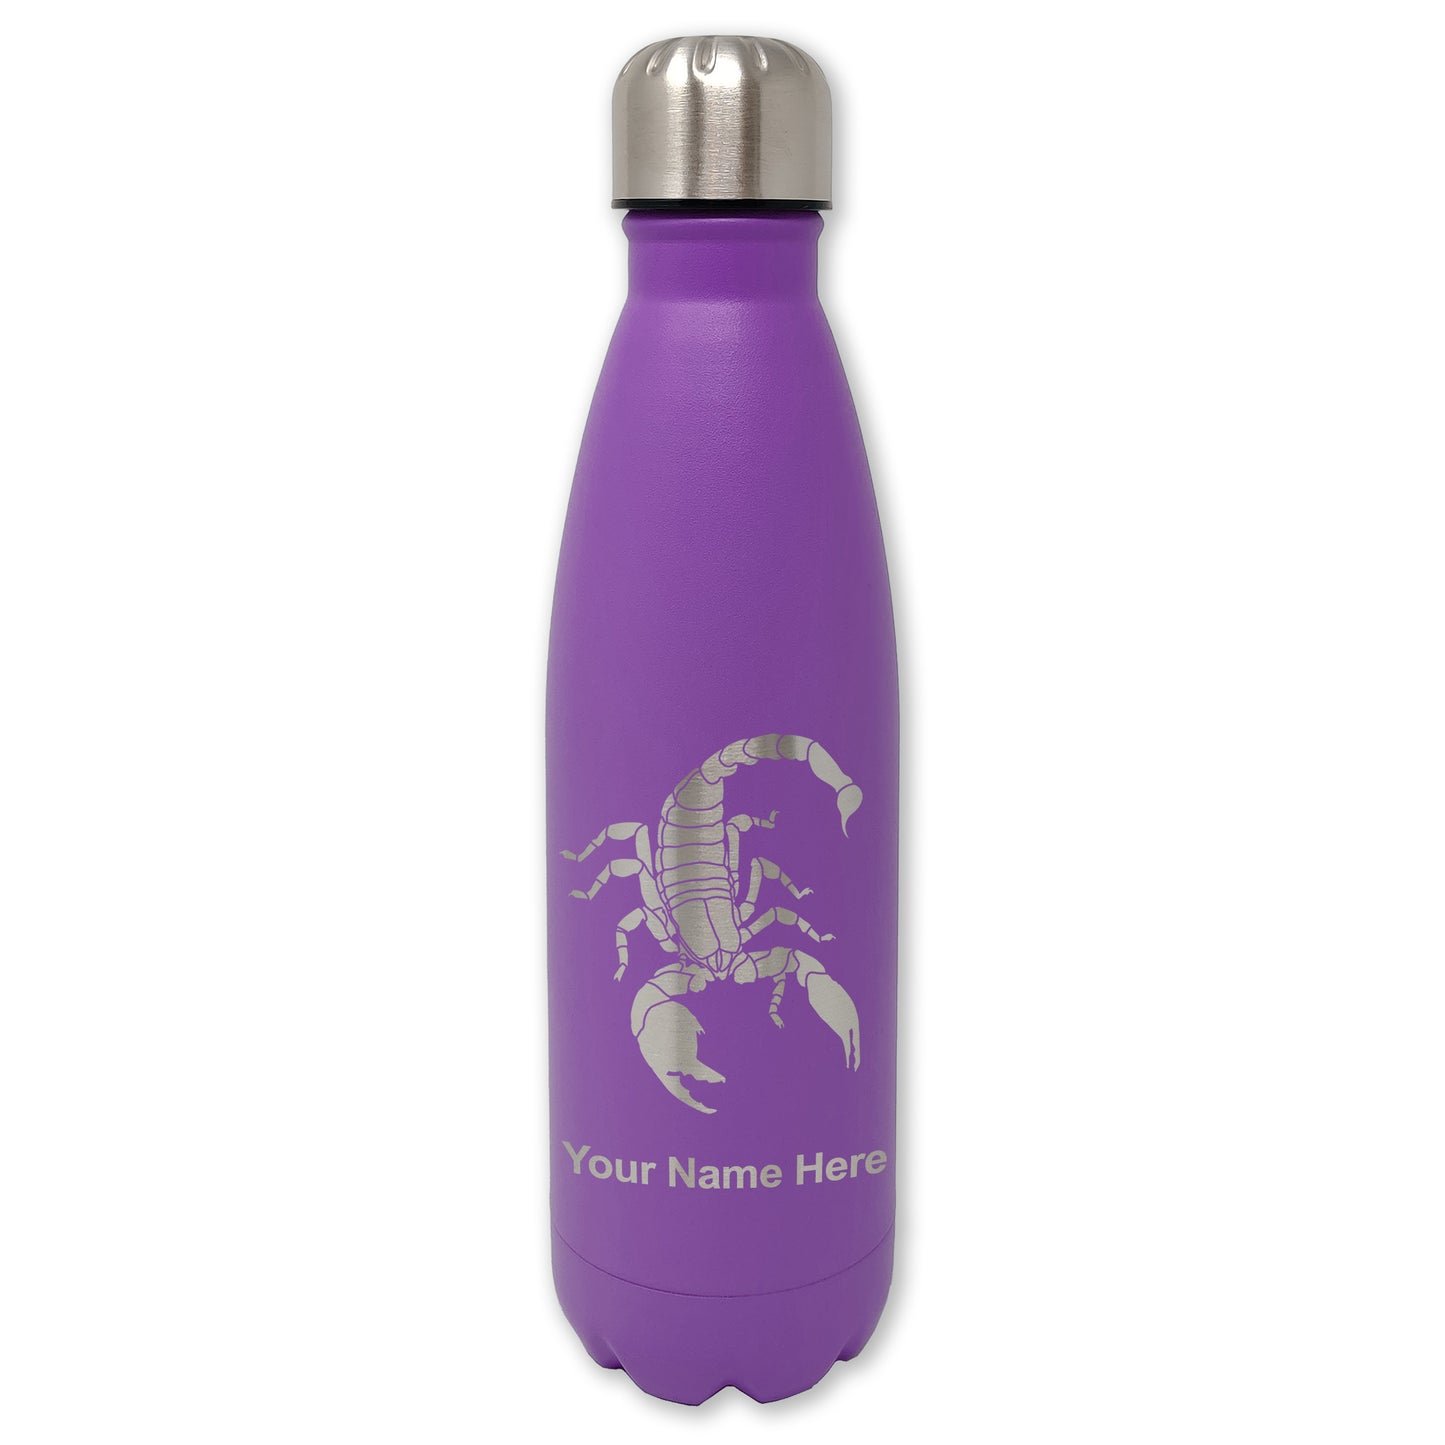 LaserGram Double Wall Water Bottle, Scorpion, Personalized Engraving Included